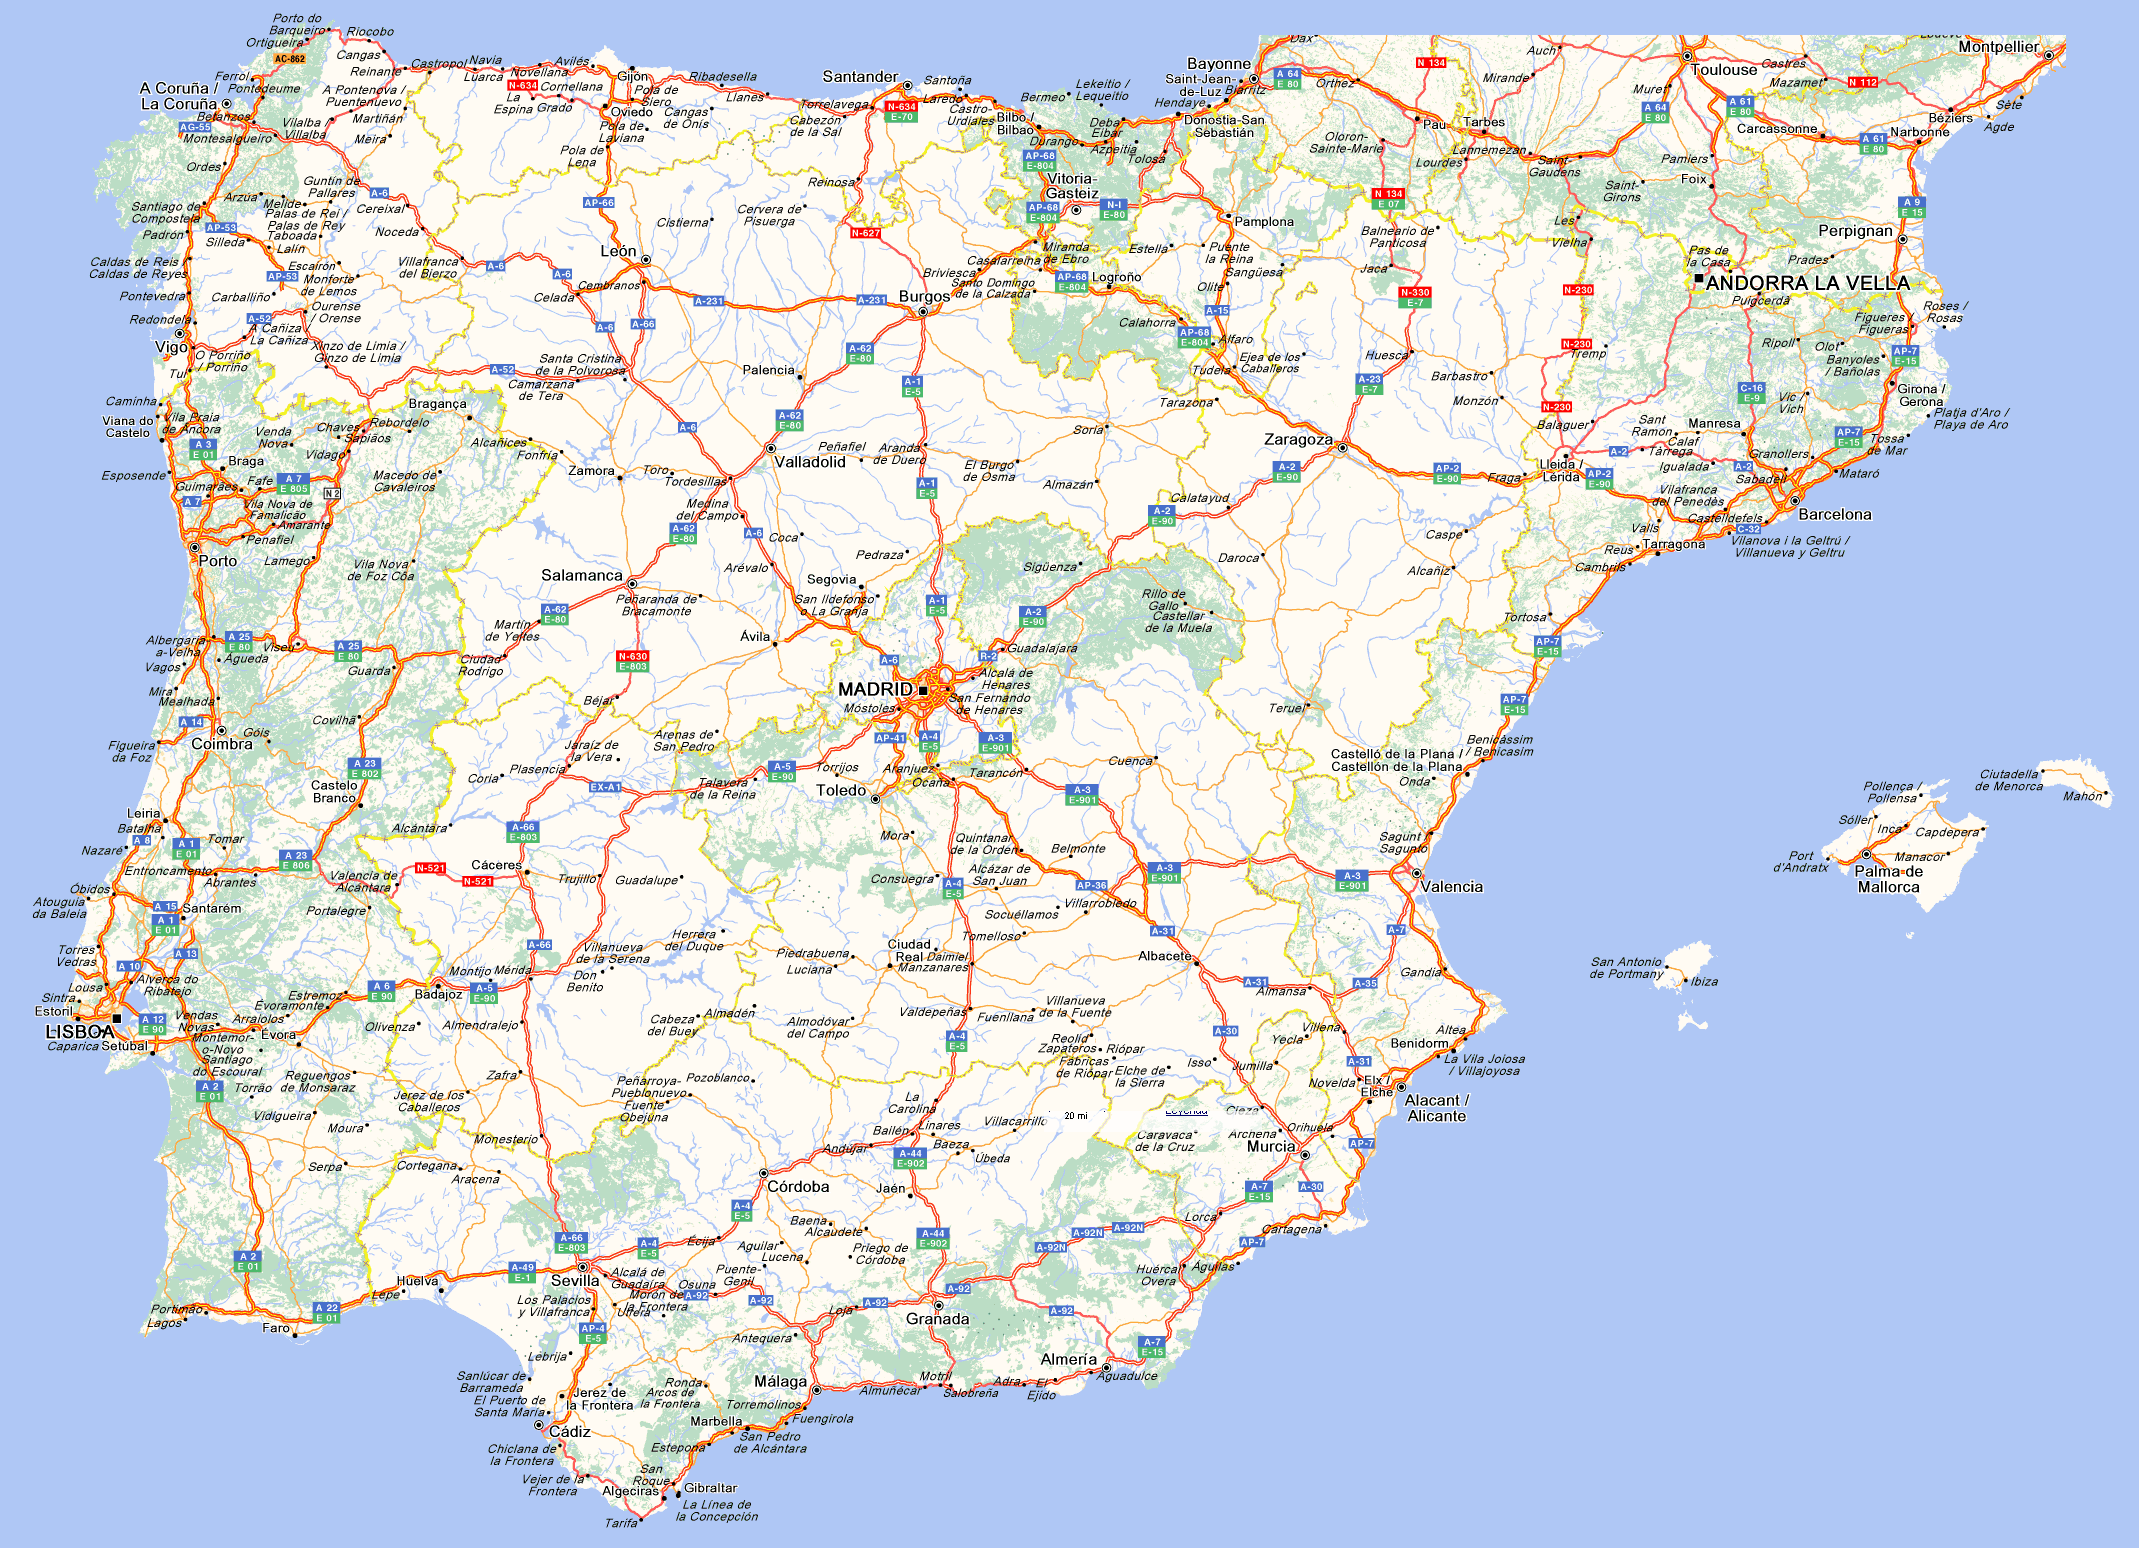 spain-and-portugal-road-map-full-size-gifex